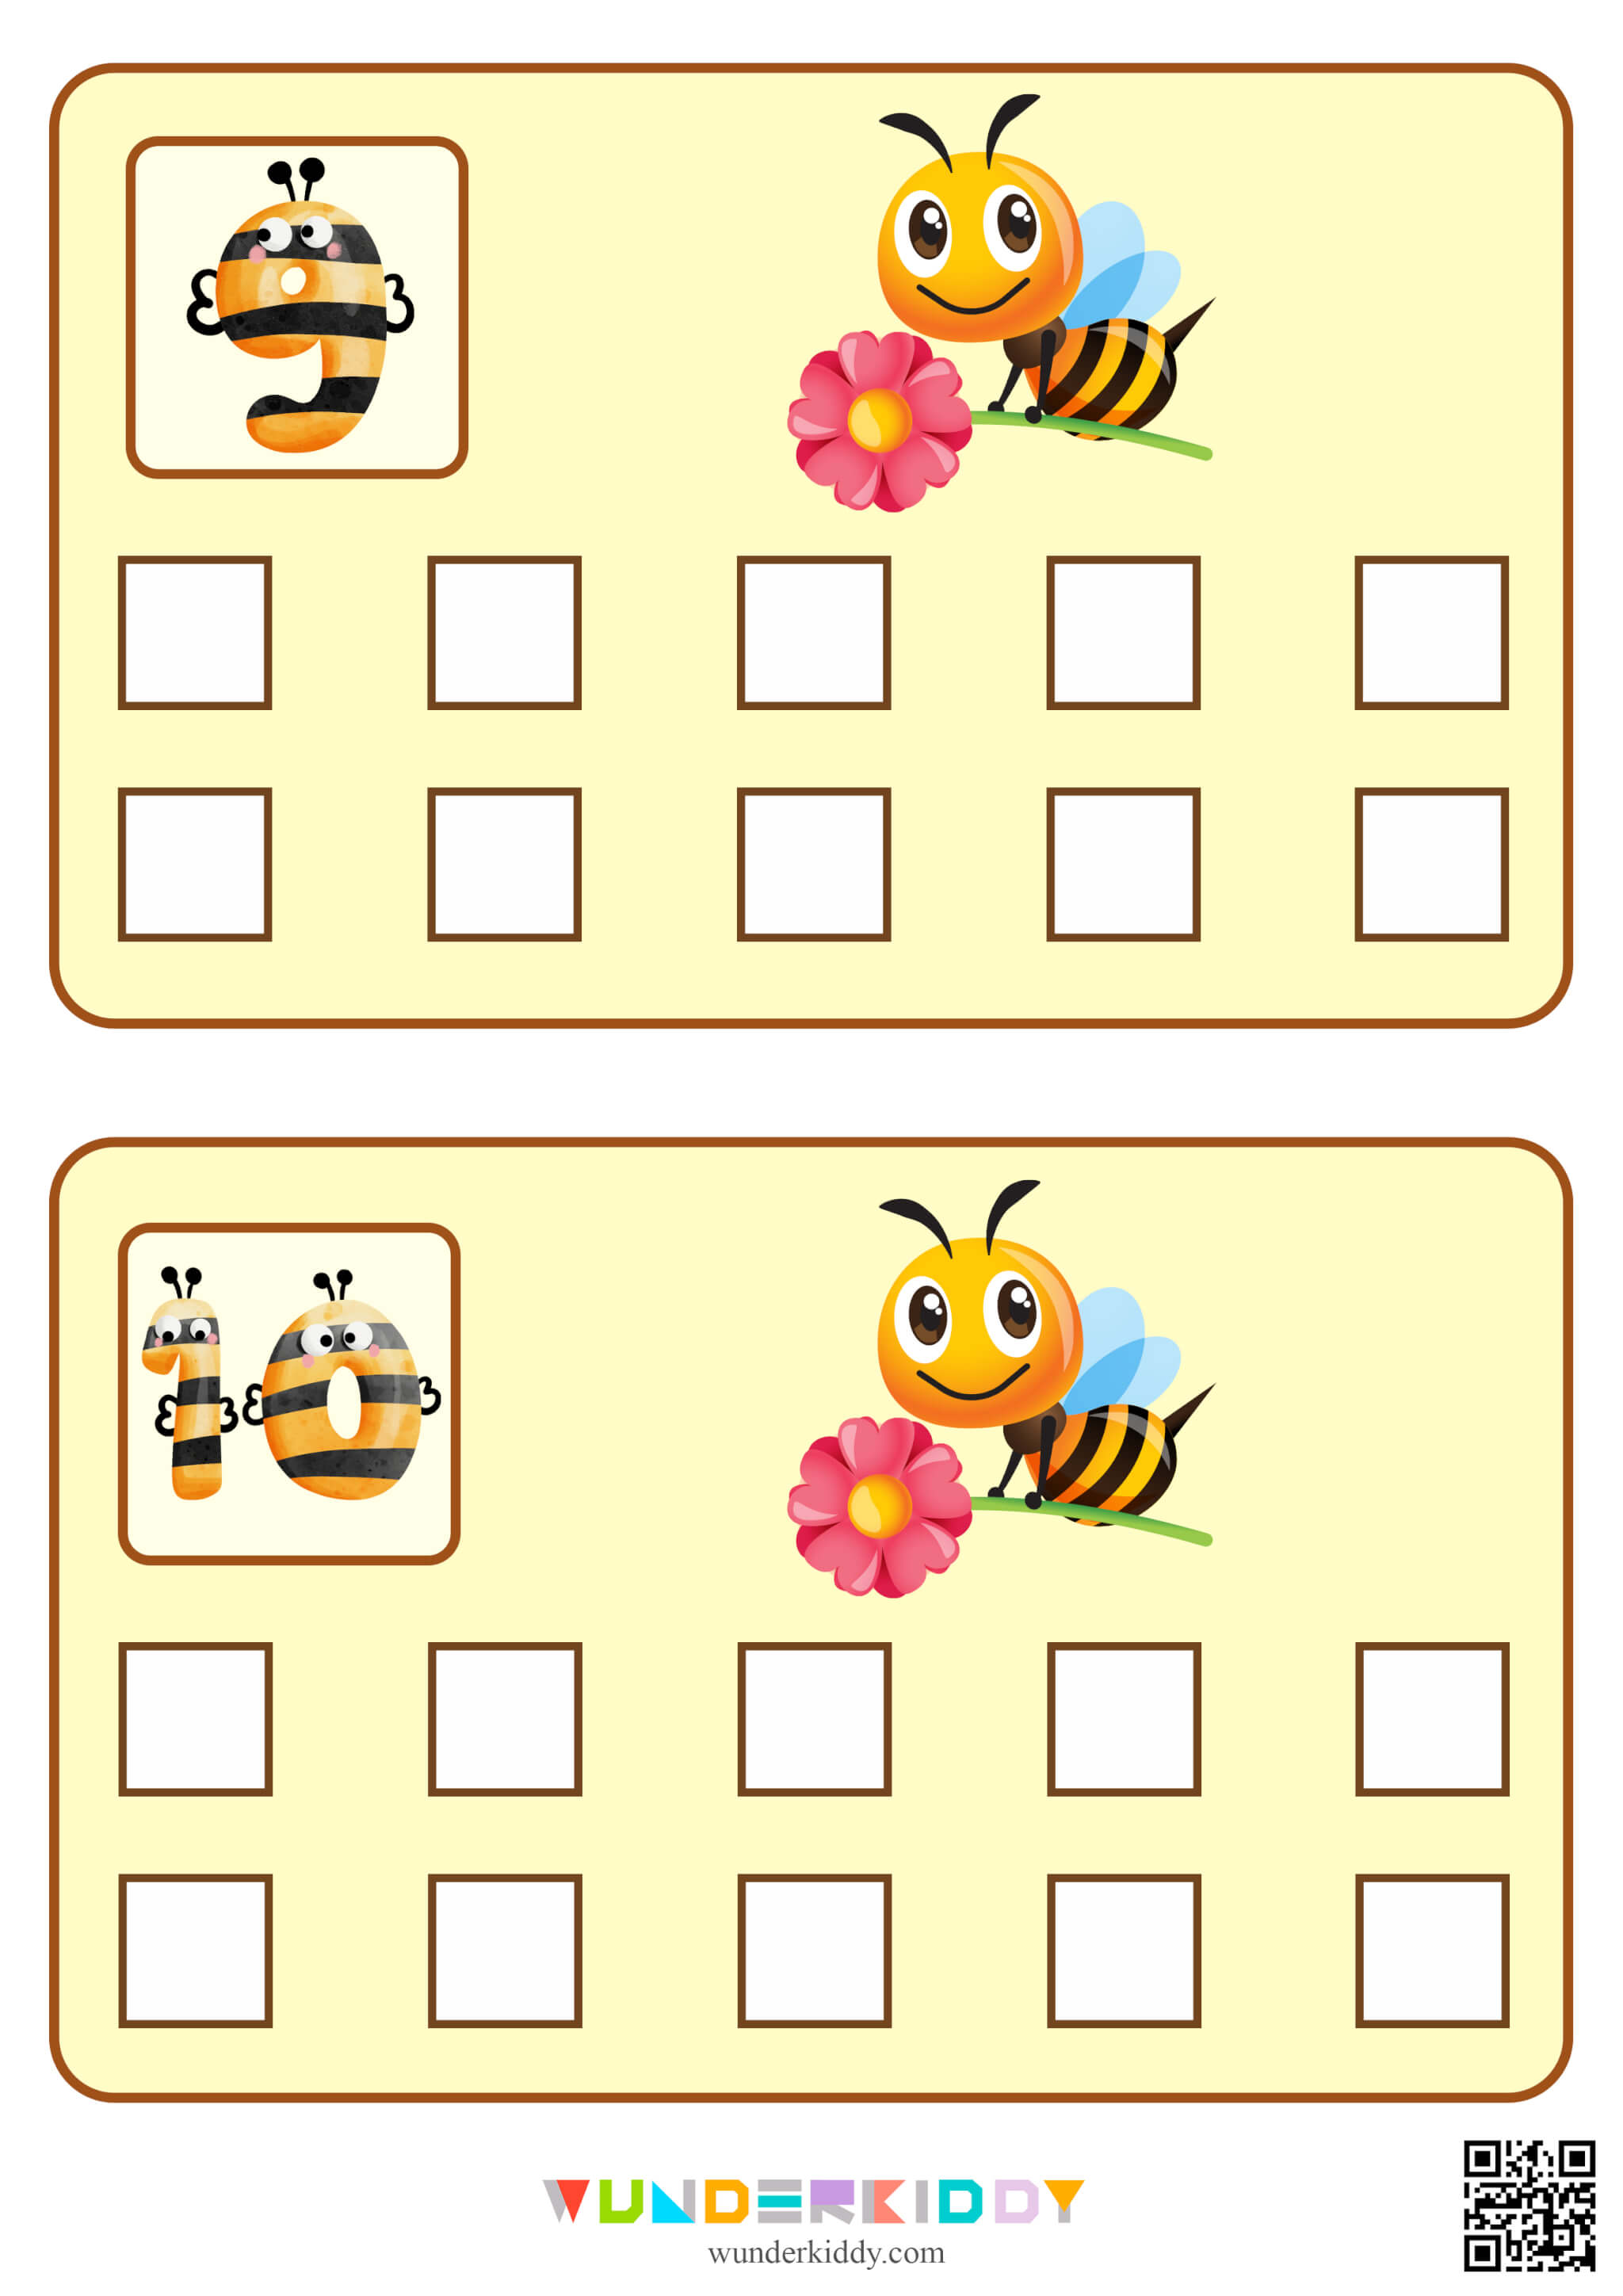 Flashcards to Practice Counting How Many Bees? - Image 6